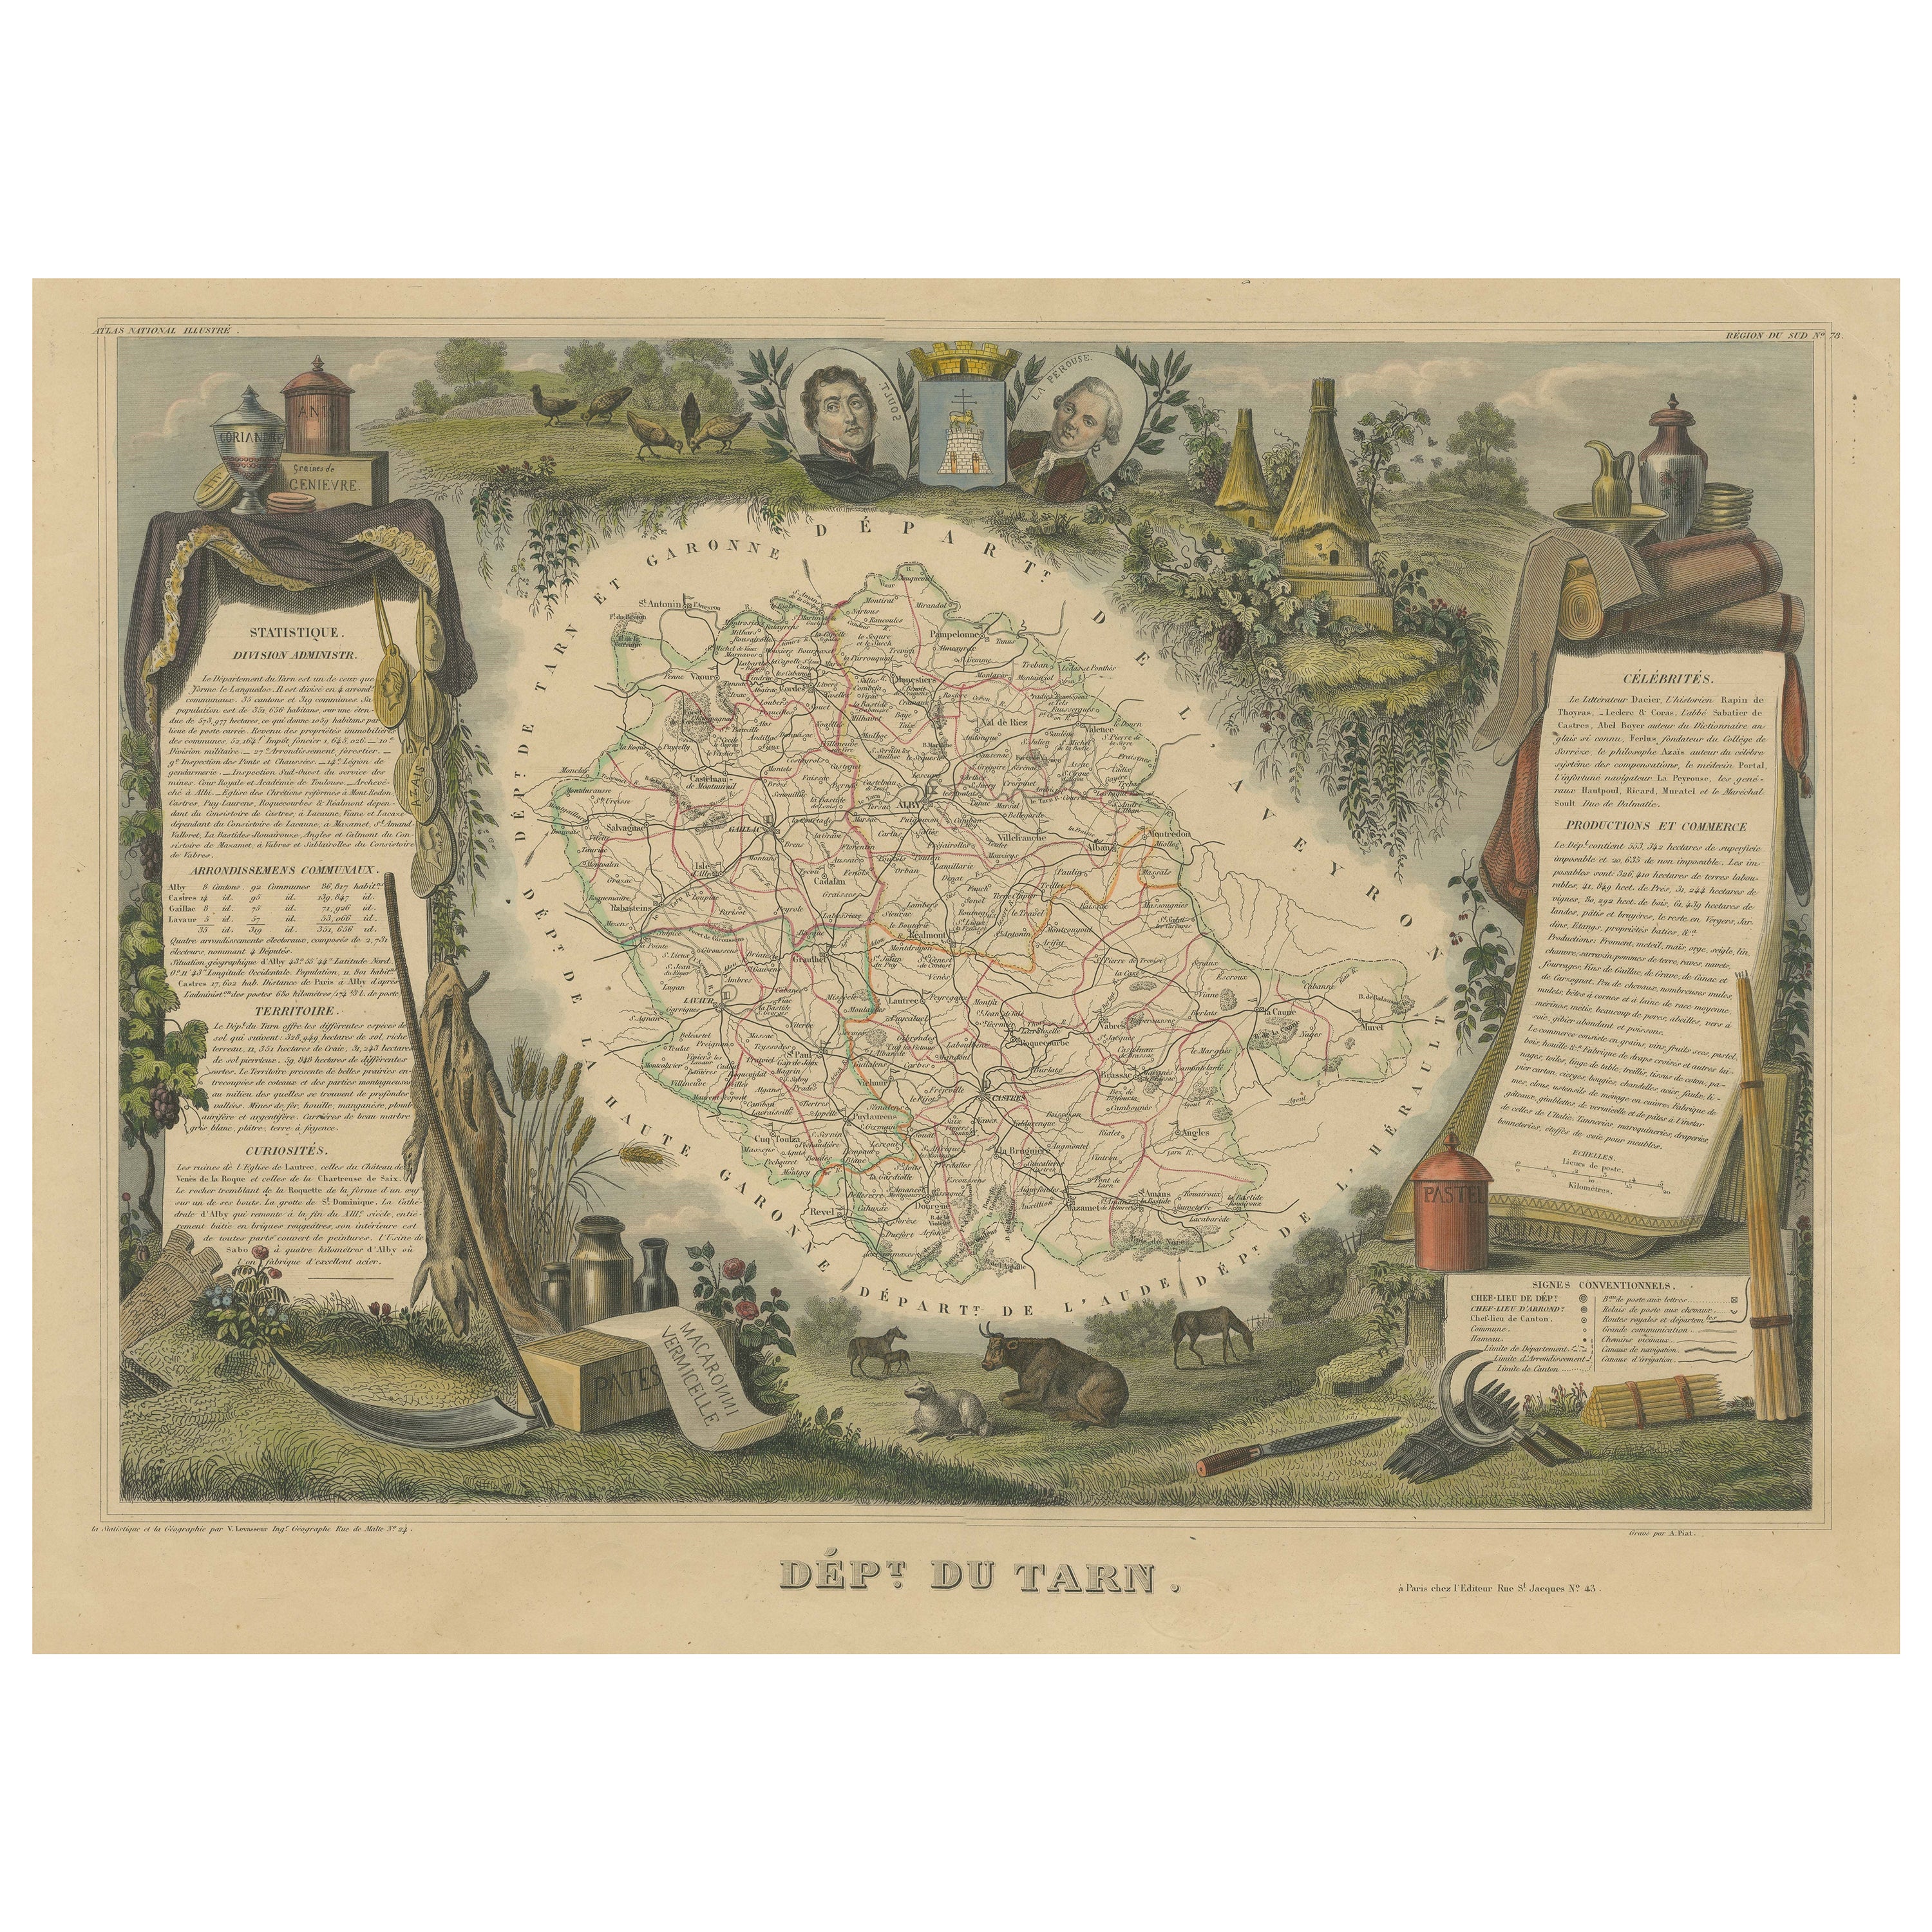 Old Map of the French department of Tarn, France For Sale